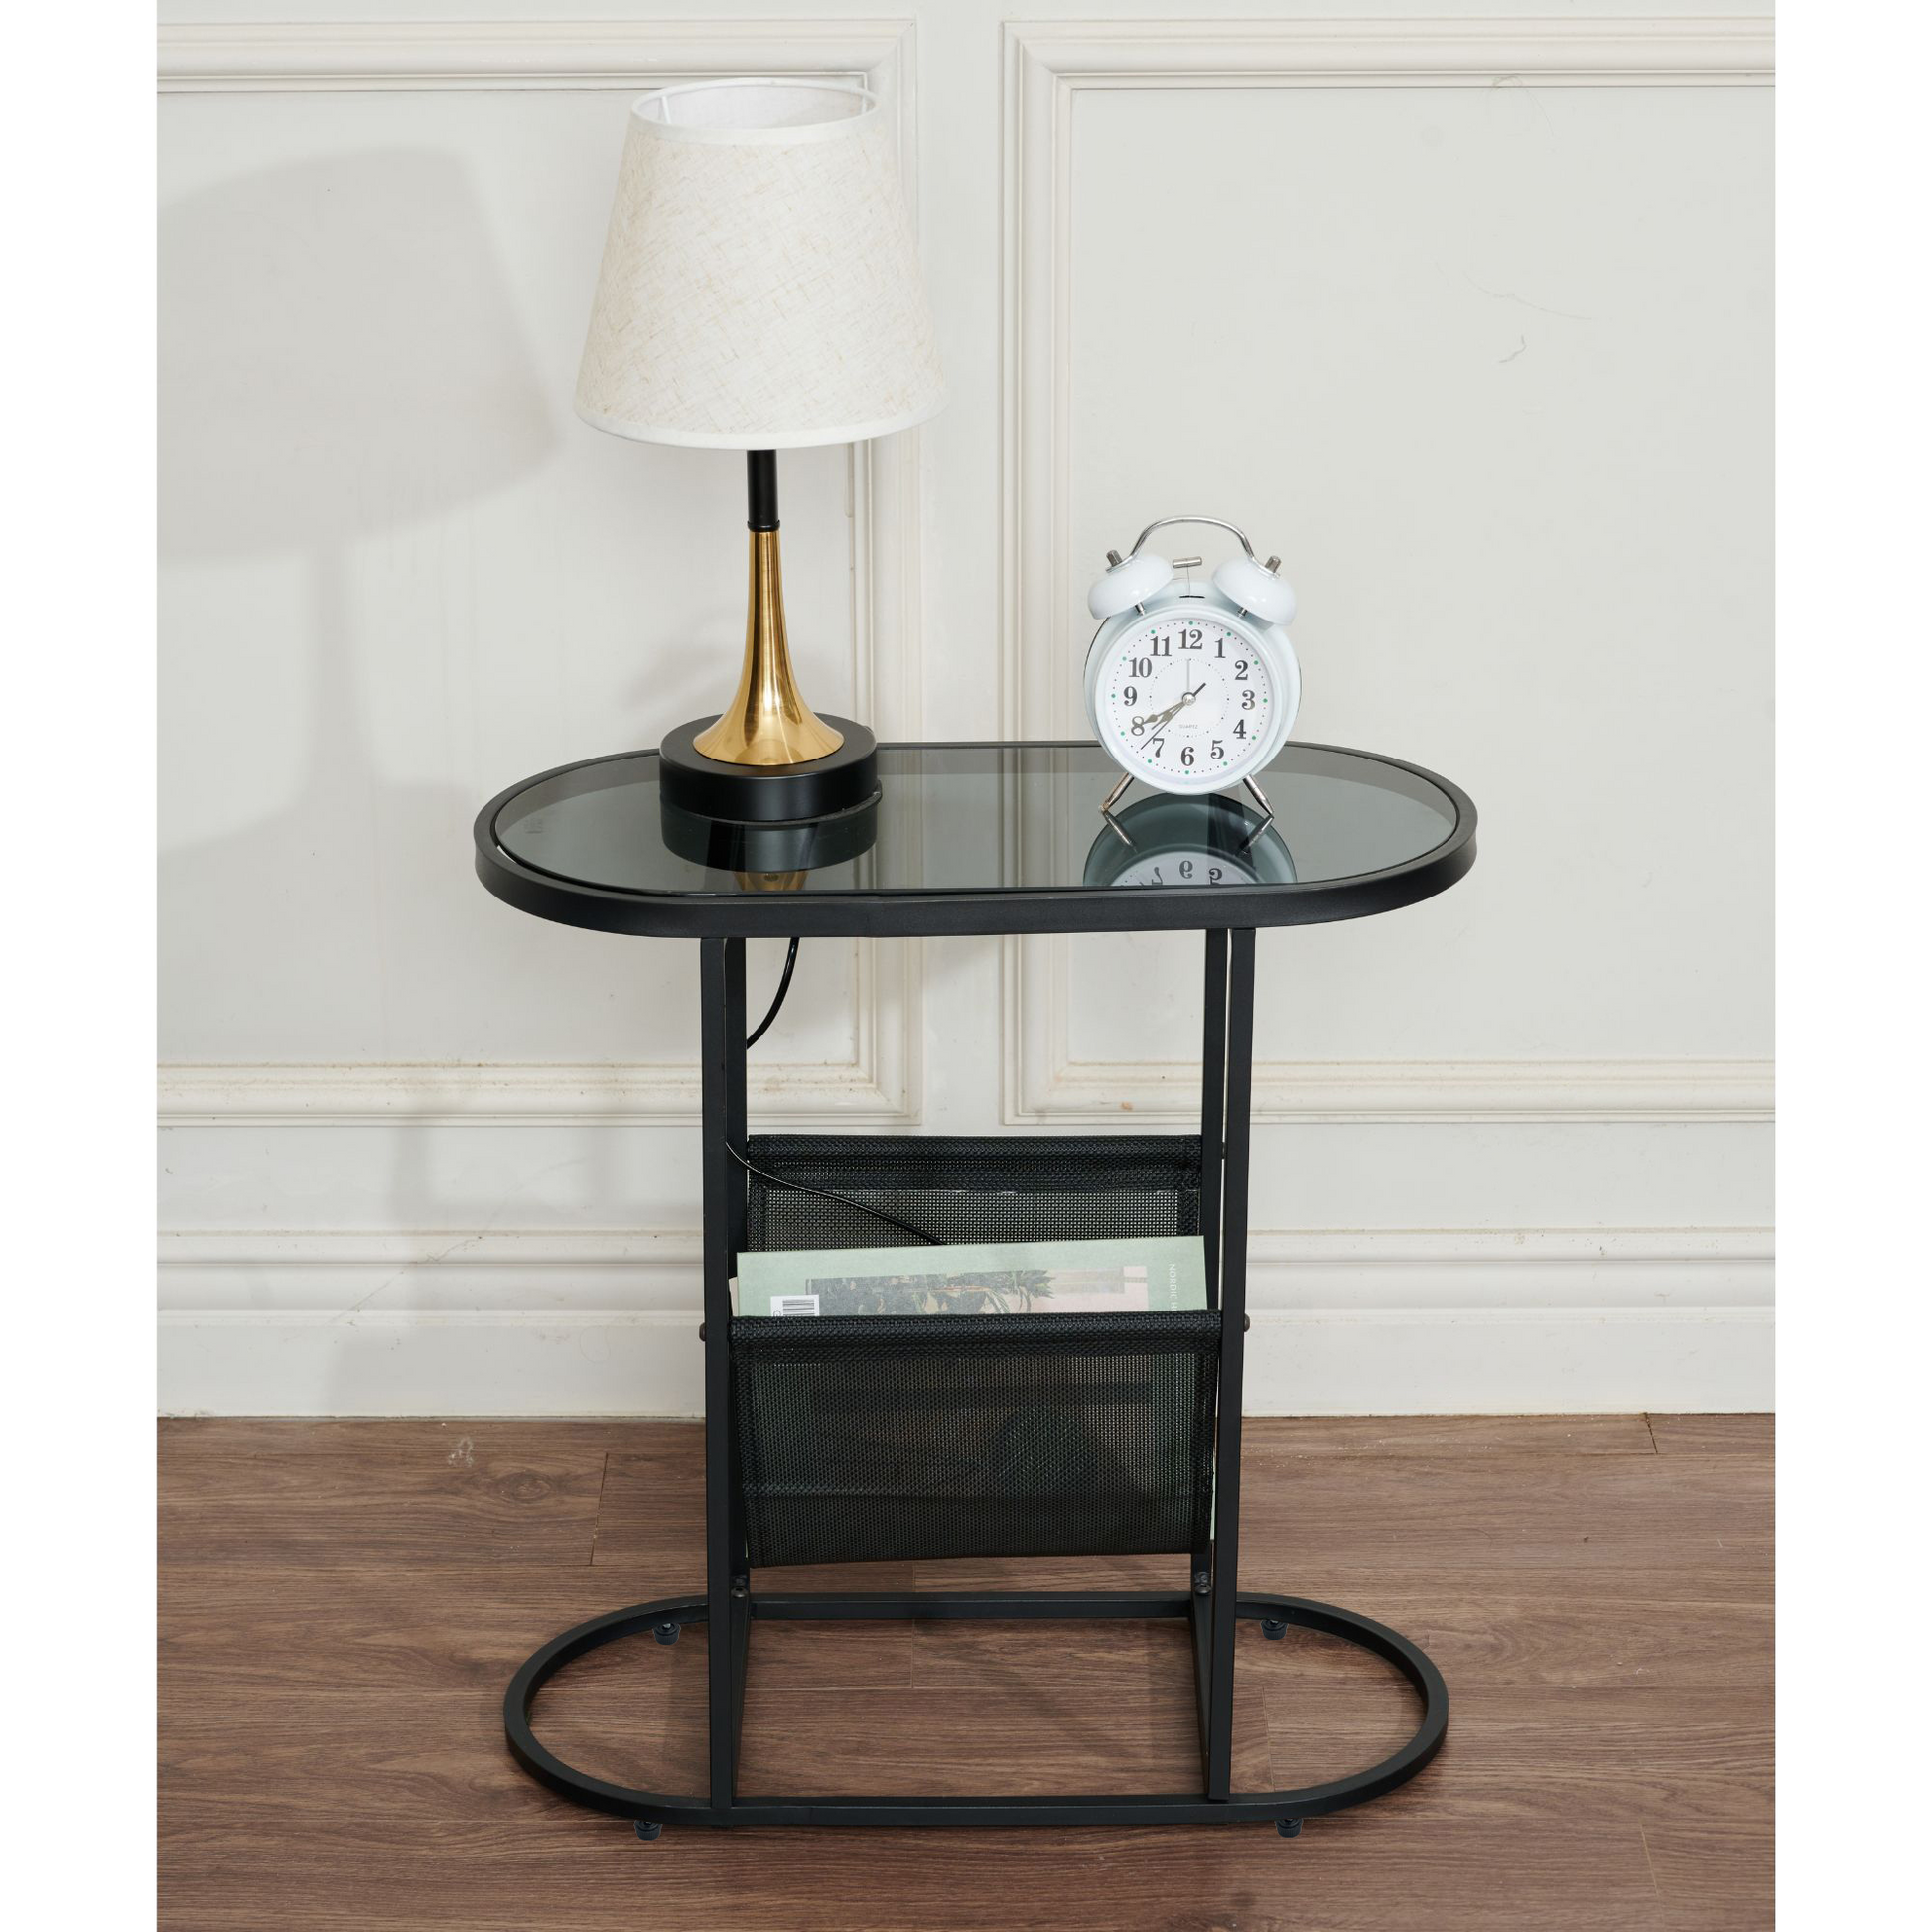 Glass Oval Small Side Tables Living Room Small Space With Magazines Organizer Storage Space - Free Shipping - Aurelia Clothing